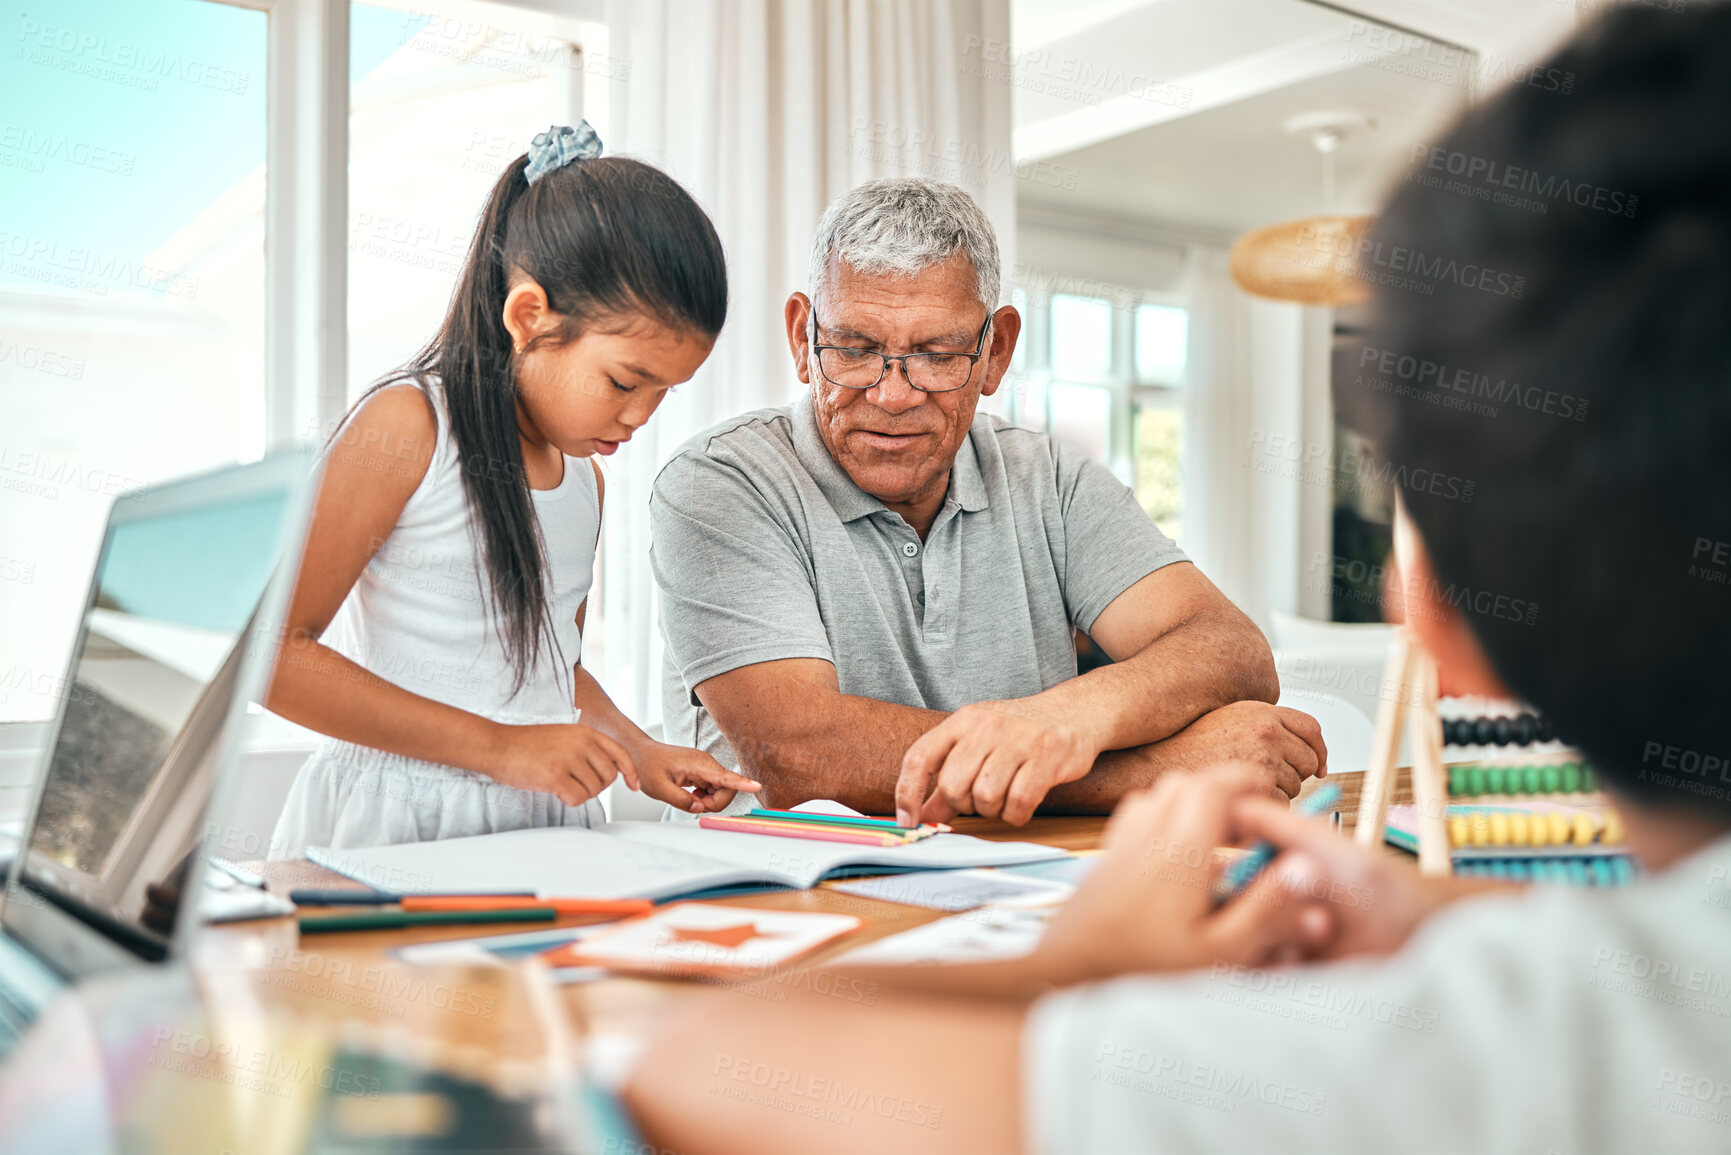 Buy stock photo Education, learning and family together with homework, academic material and senior man with children studying. Grandfather helping kids, learn and development with growth, study and school